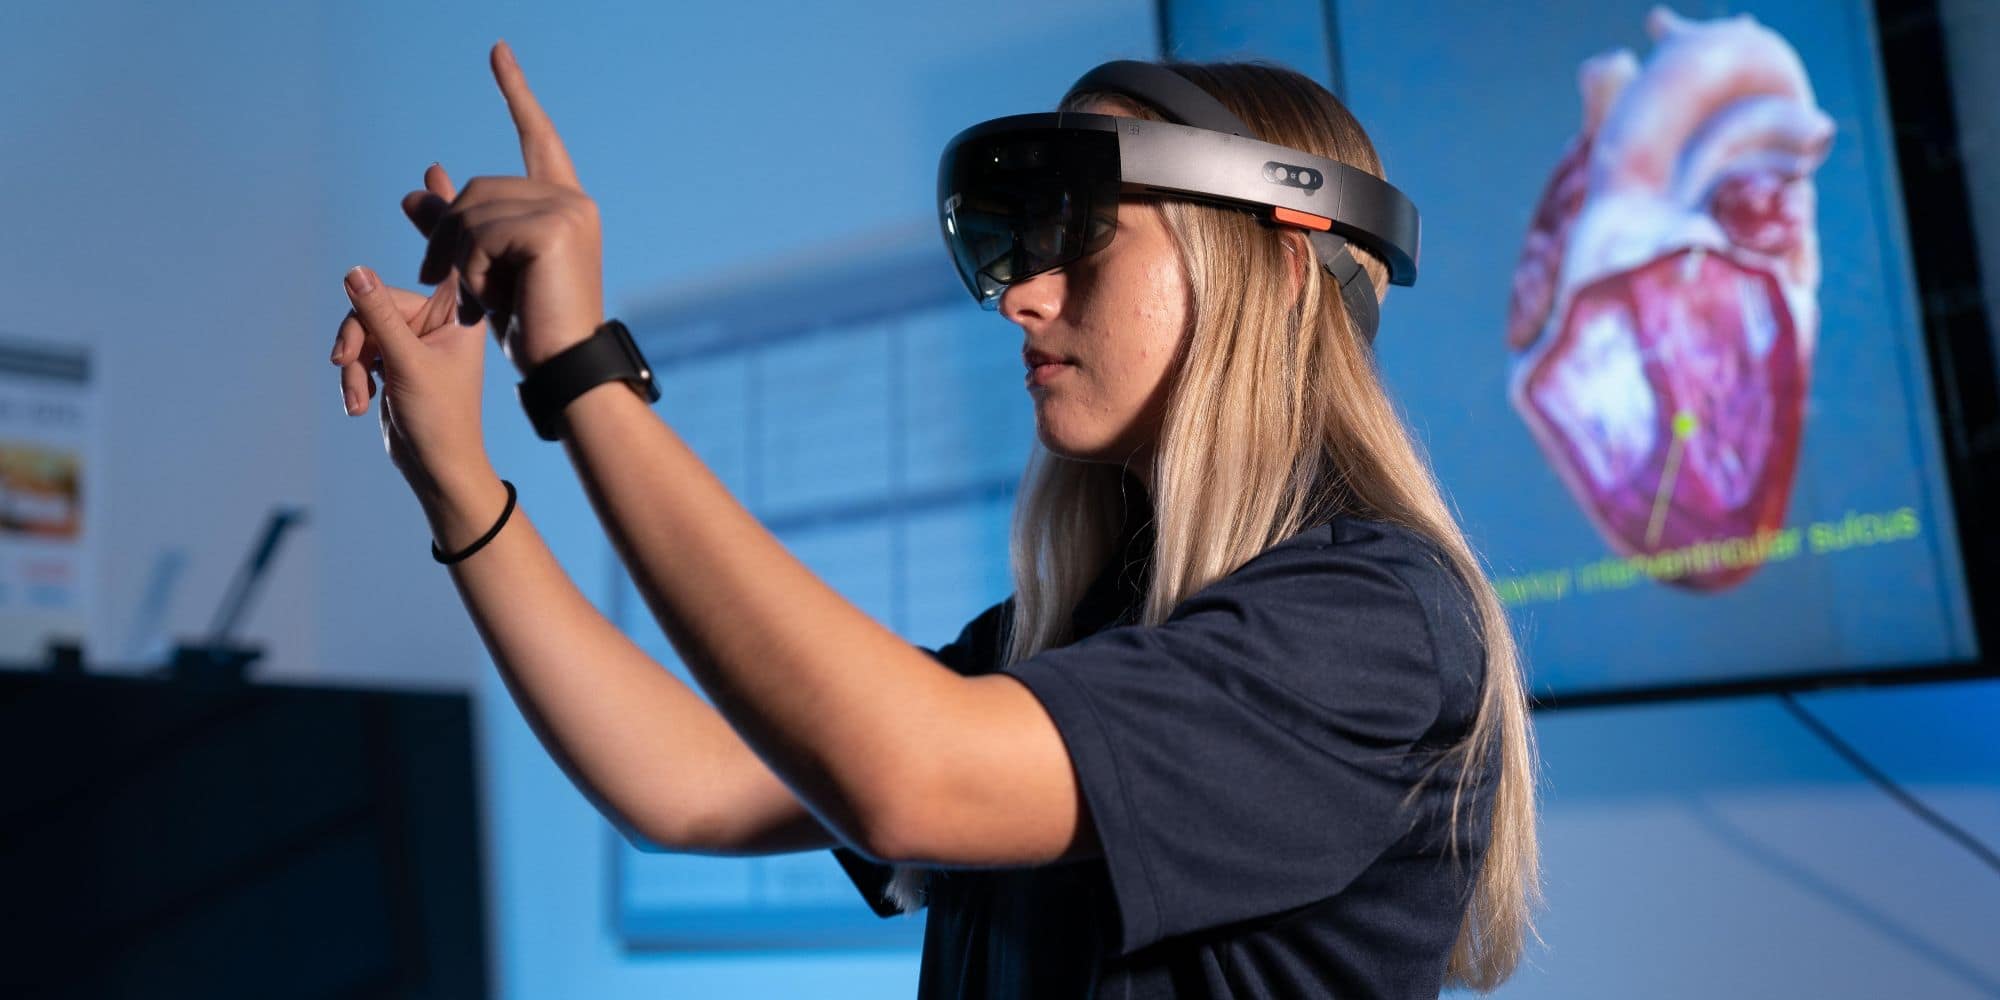 Jessyca Derby in the Research in User eXperience Lab, equipped with a HoLoLens. (Photo: Embry-Riddle Aeronautical University / David Massey)